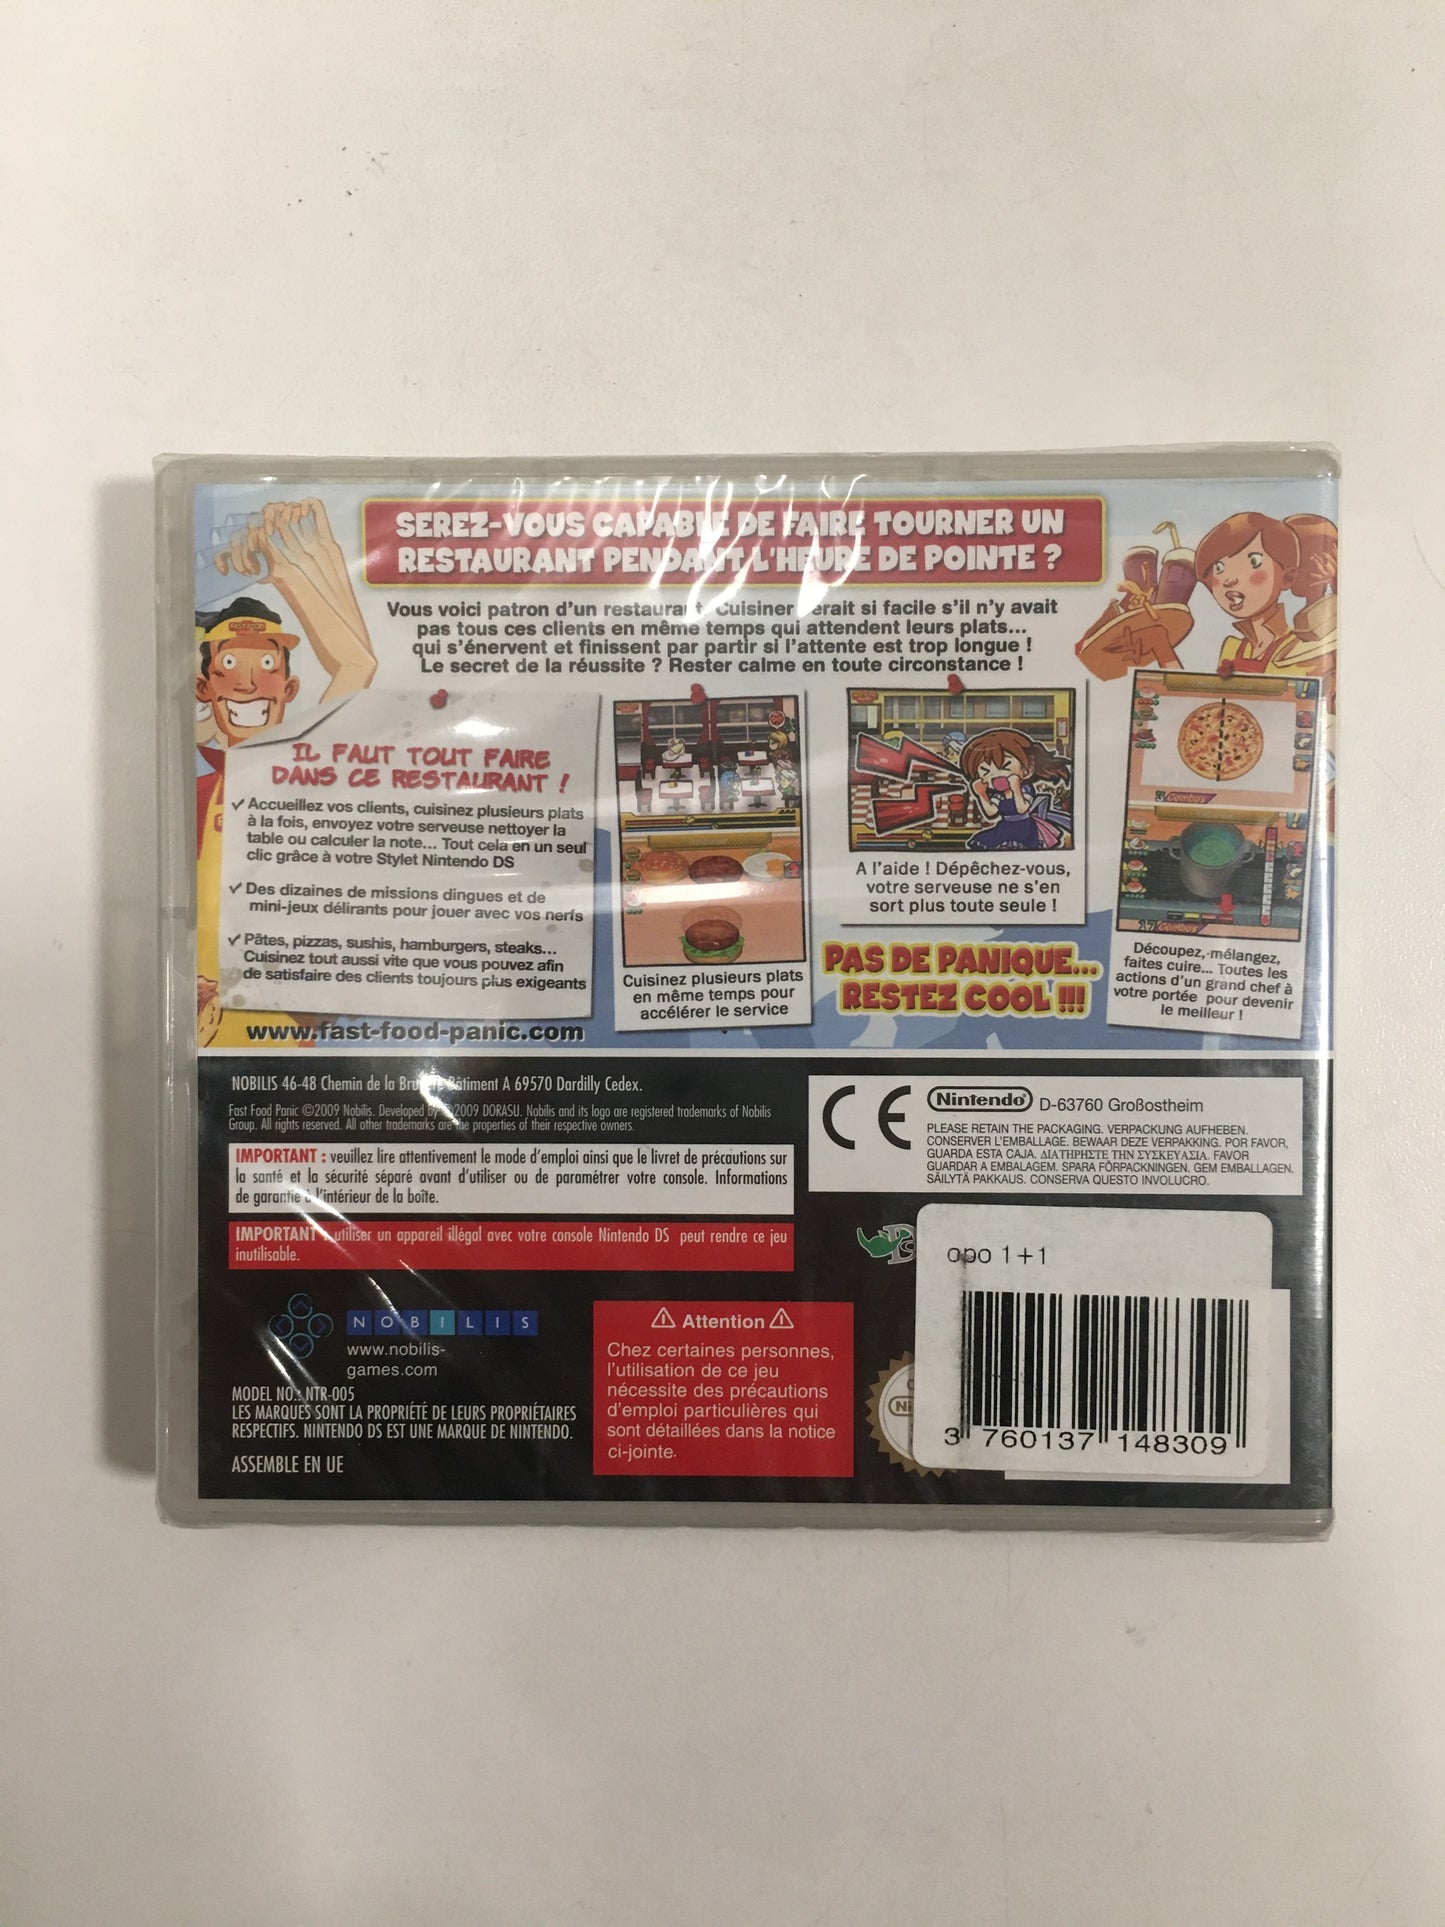 Fast food panic Nintendo ds neuf sous blister